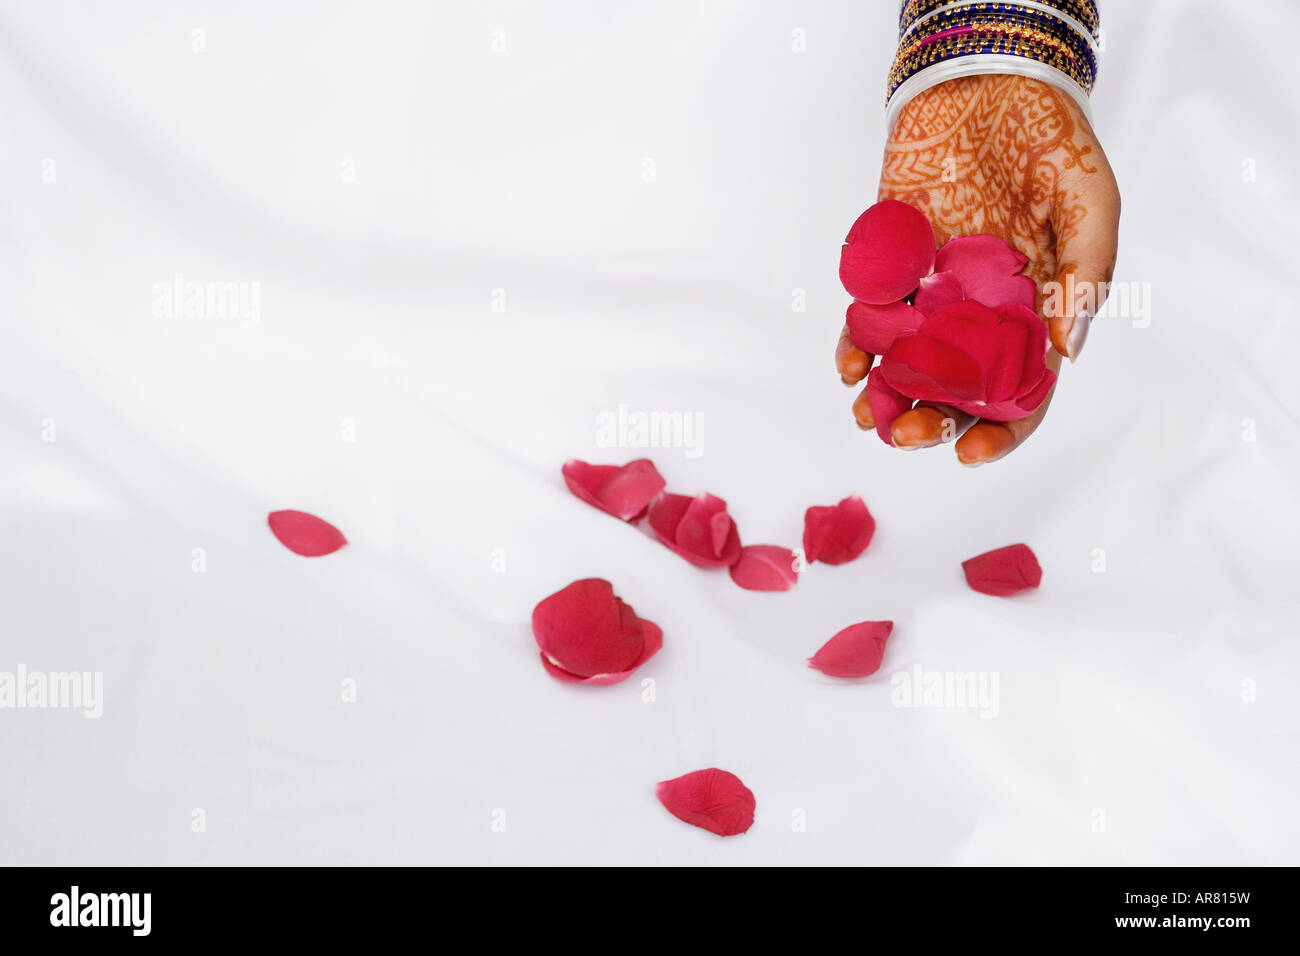 Indian girl with henna hand holding red rose petals Banque D'Images